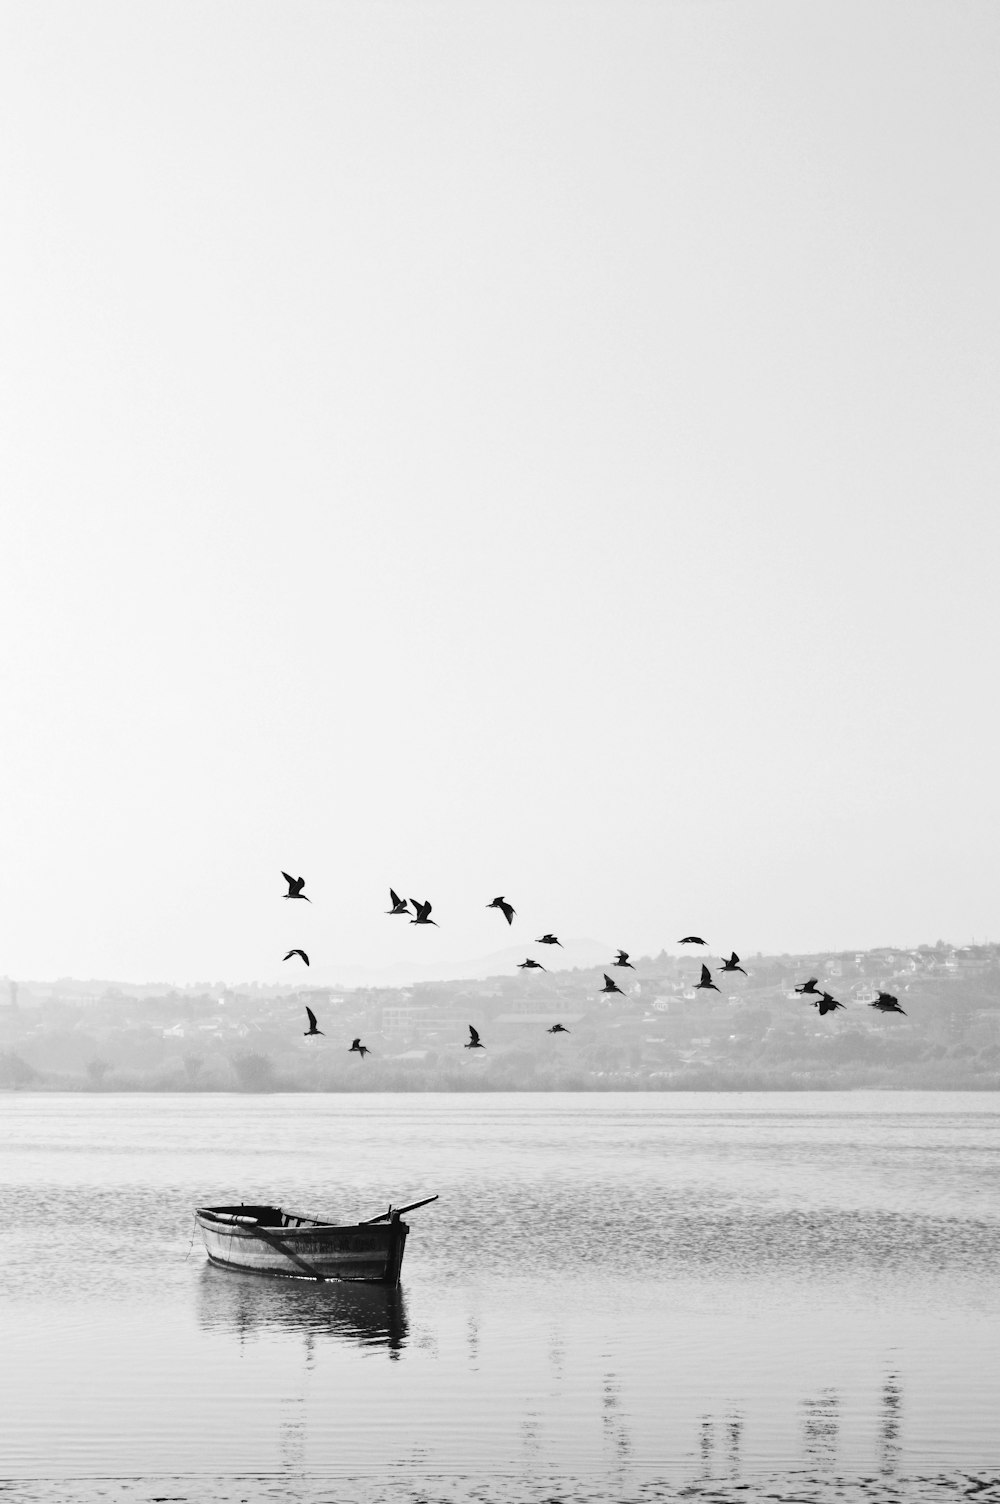 999+ Black And White Landscape Pictures | Download Free Images on Unsplash